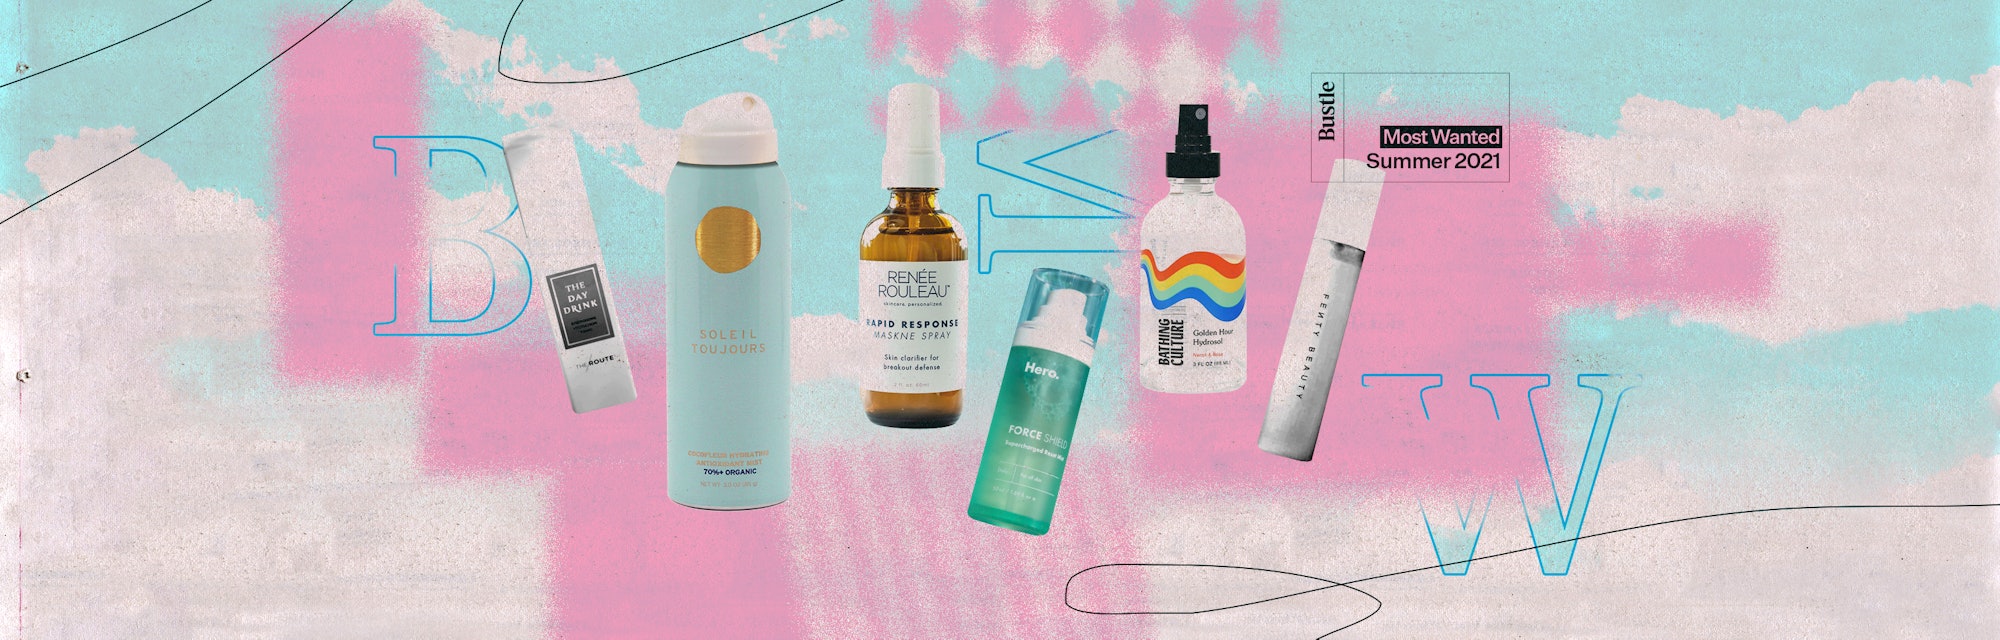 Grab one of these 10 refreshing face mists to keep your skin cool and calm all summer long.